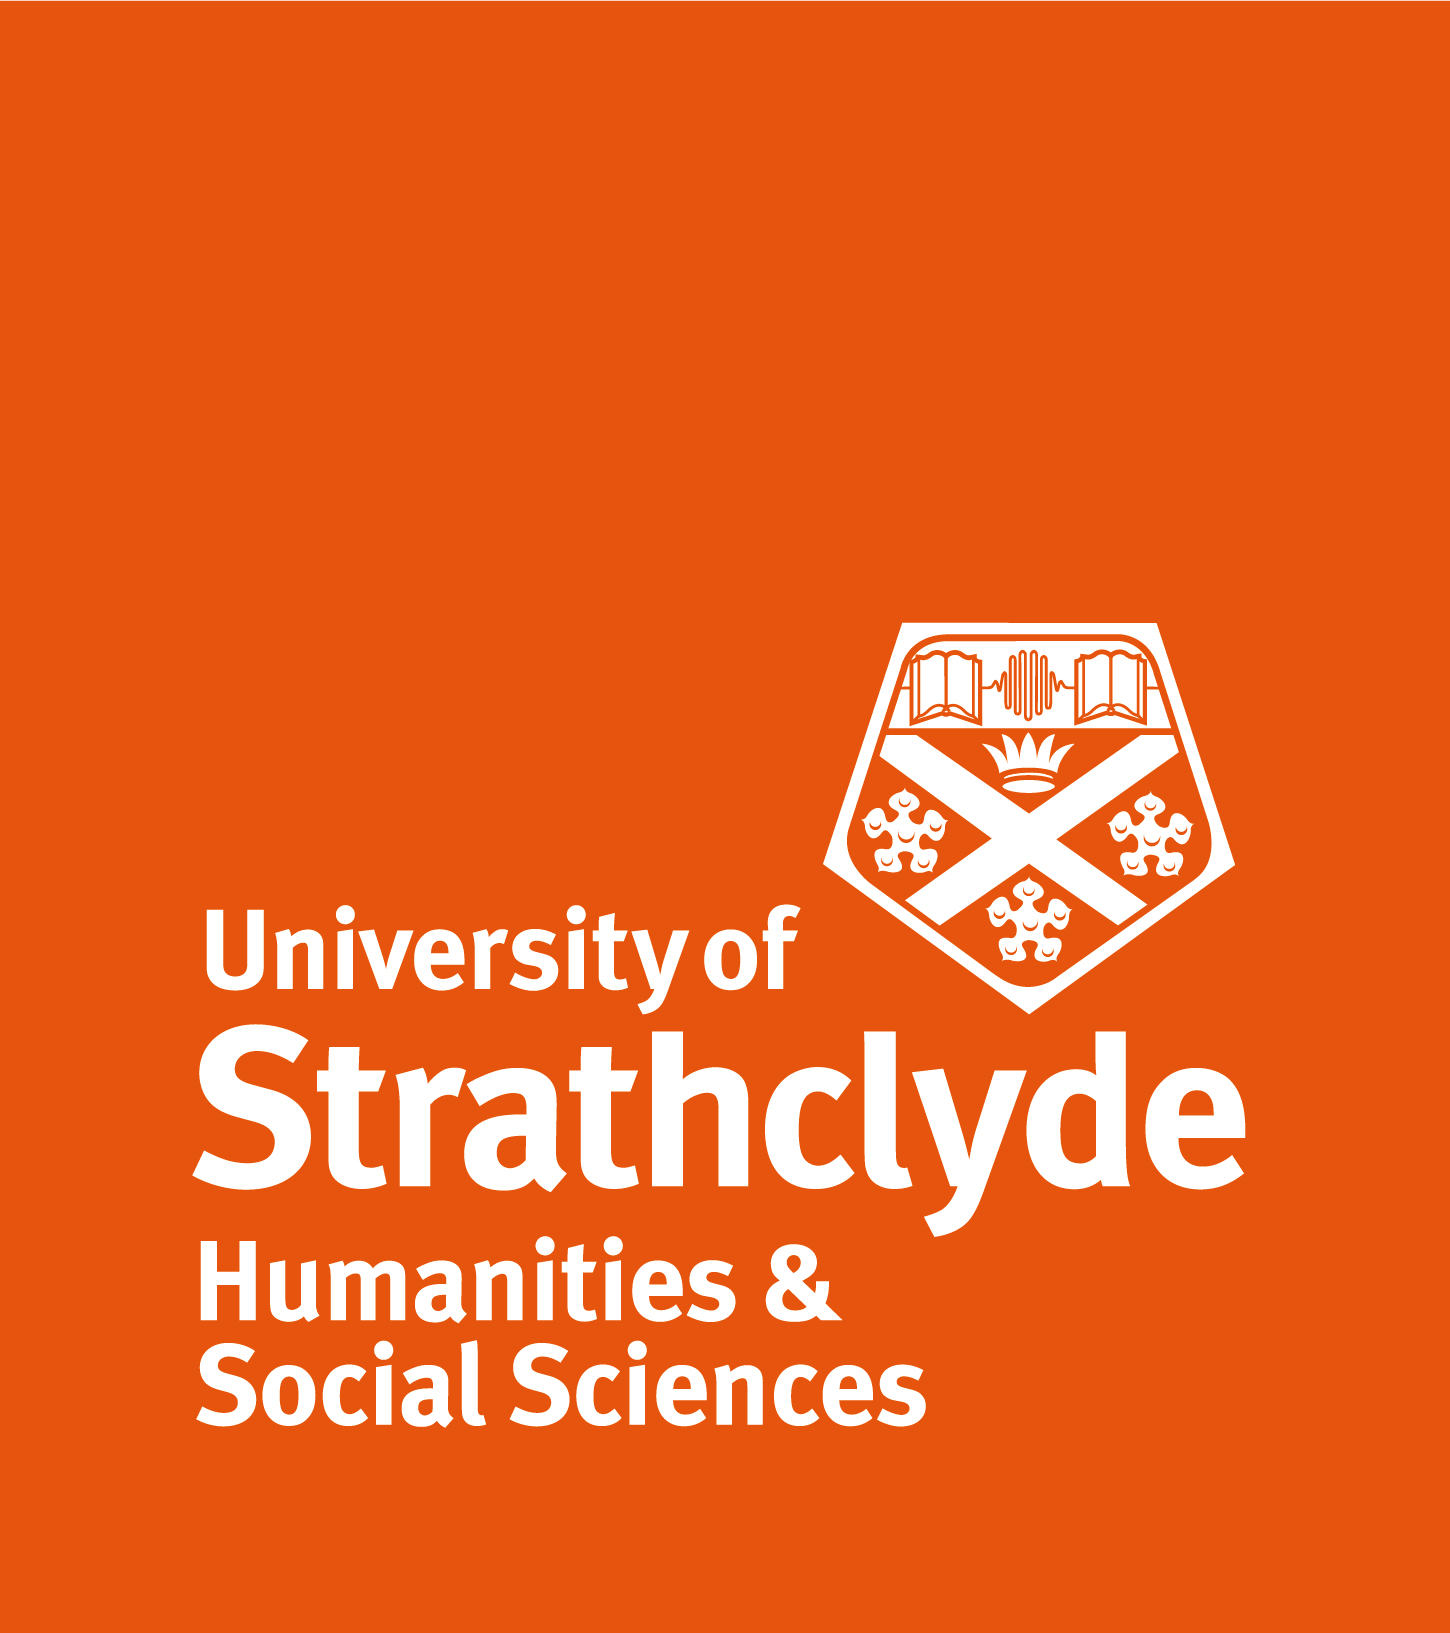 orange background with white uni logo and humanities & social sciences in white text